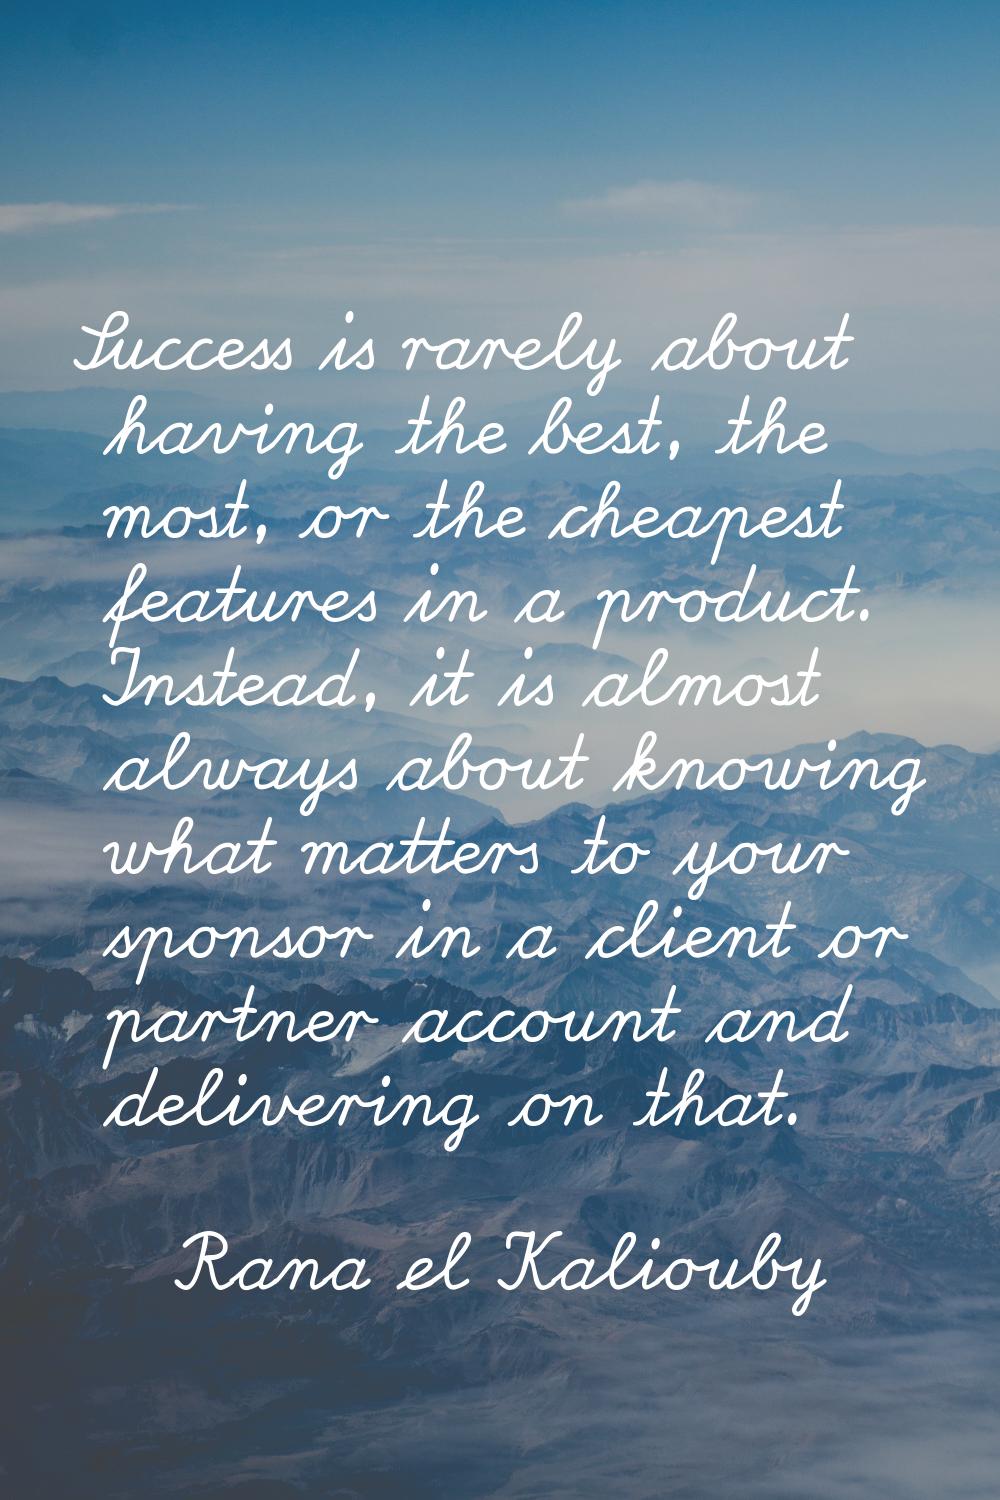 Success is rarely about having the best, the most, or the cheapest features in a product. Instead, 